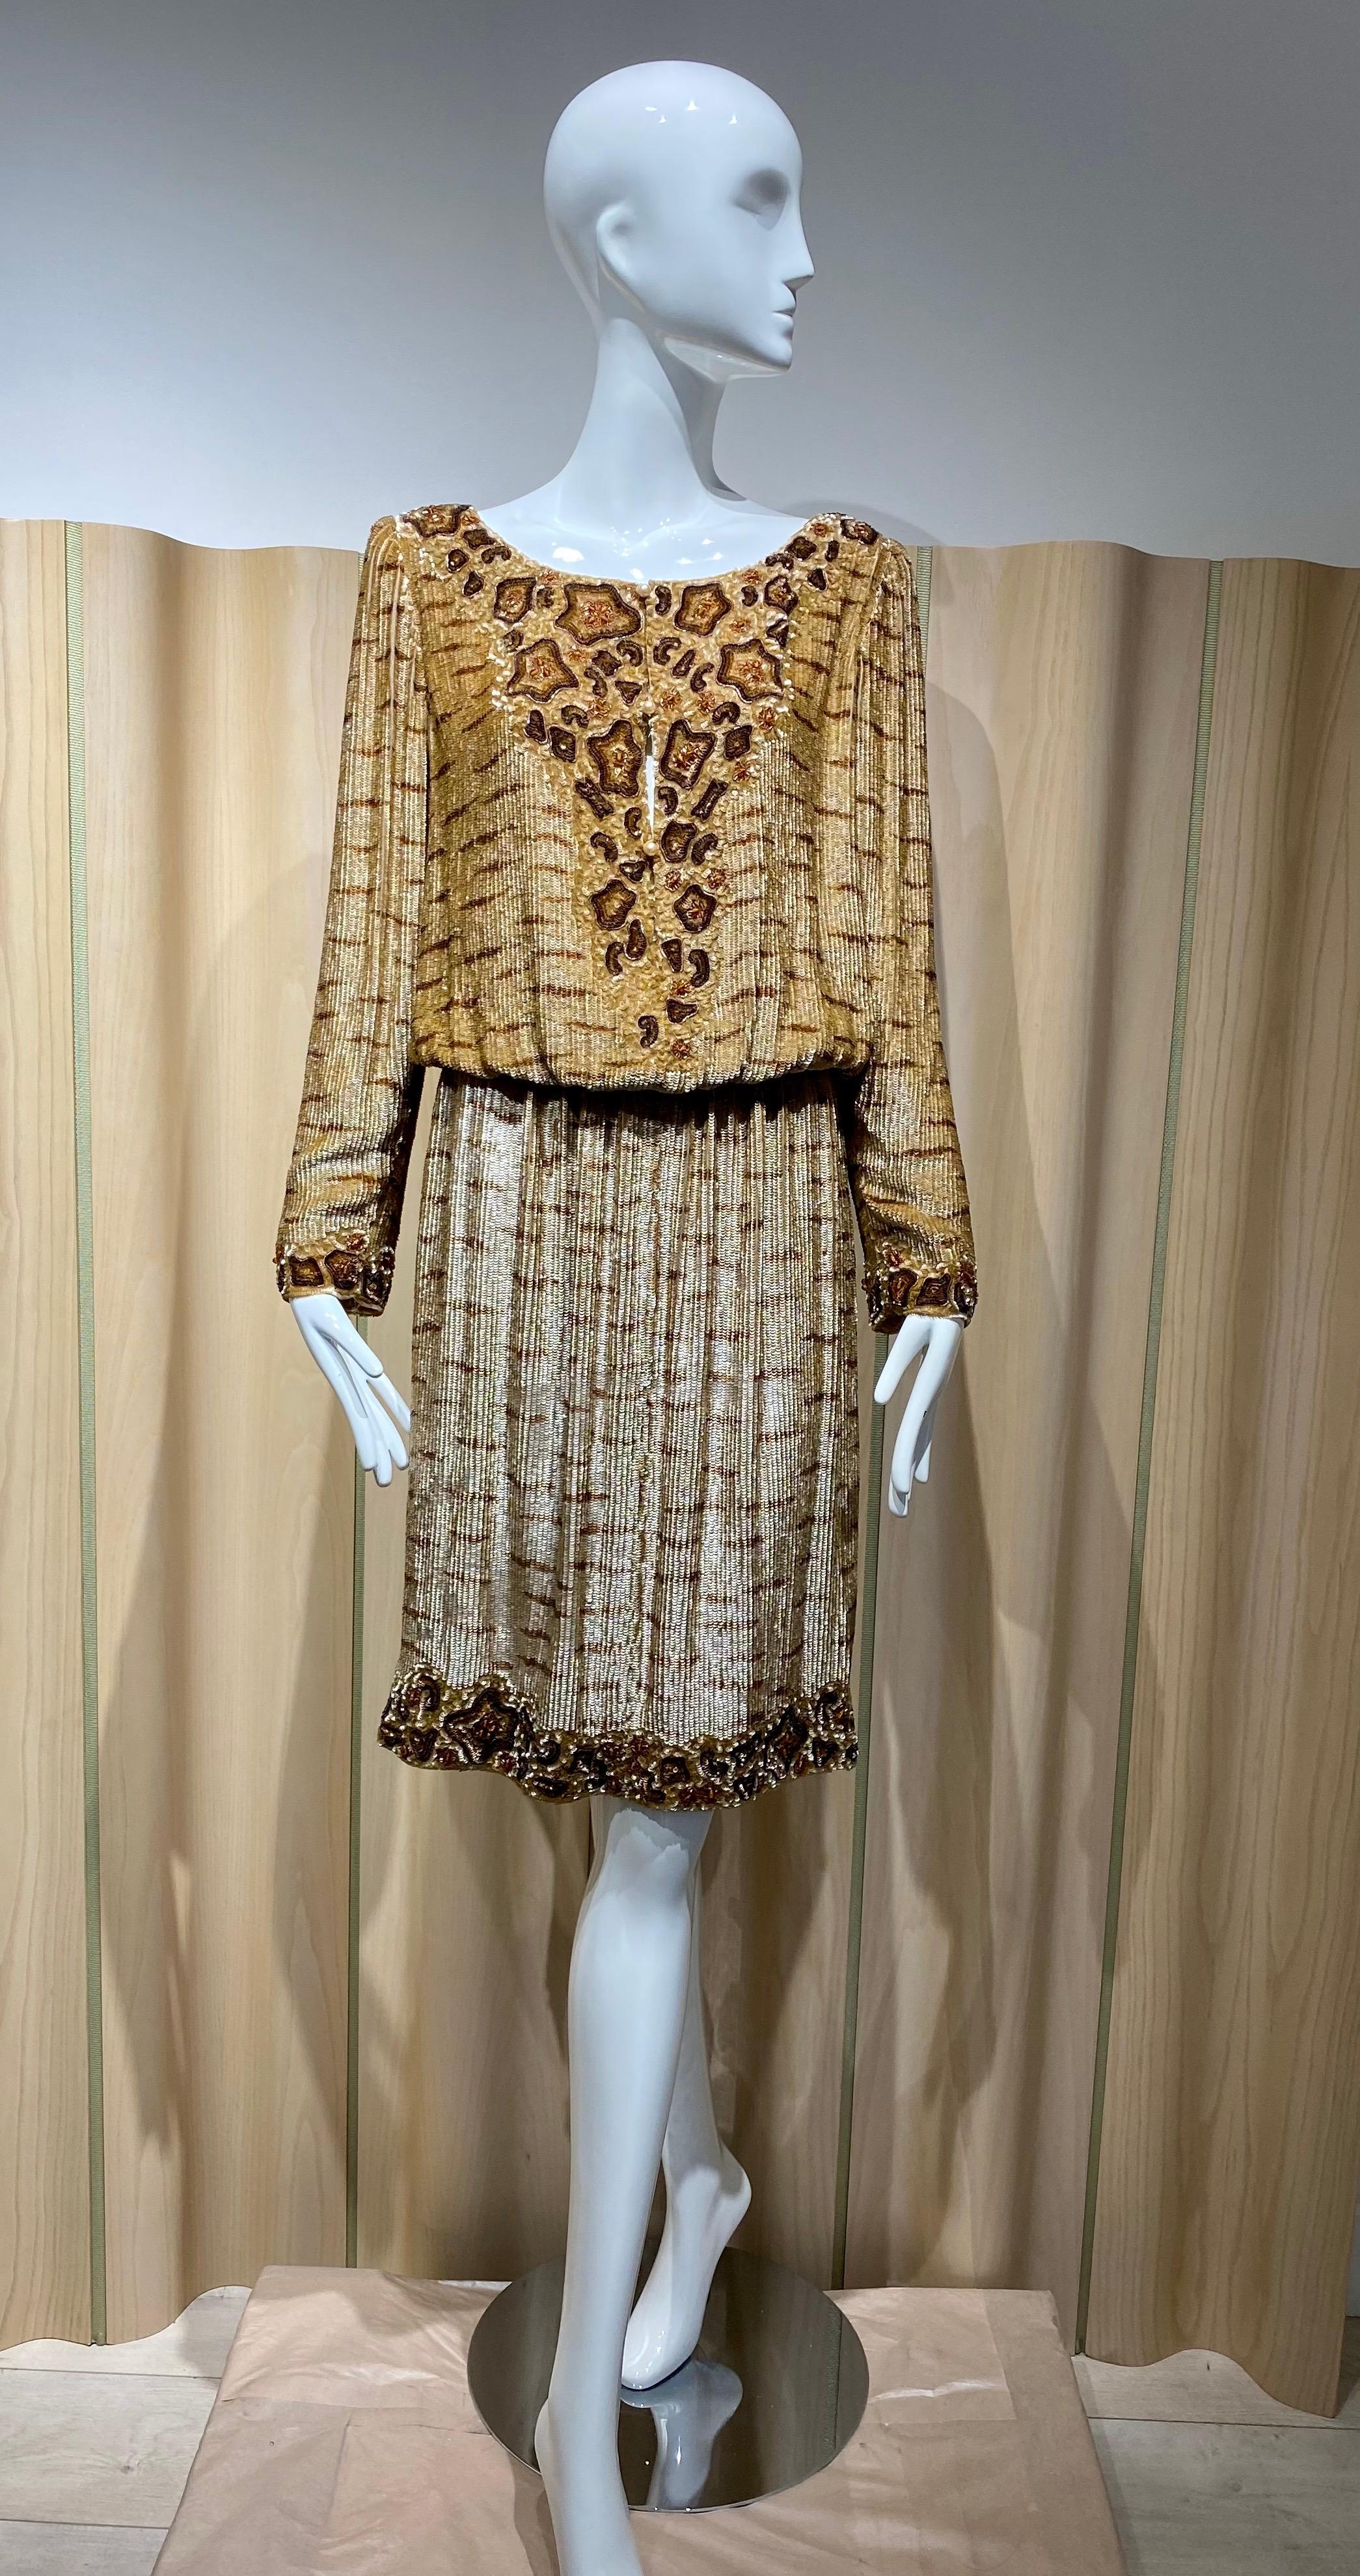 Vintage 90s Bill Blass Brown Printed Beaded Embellished metallic sequin long sleeve cocktail dress .
Dress has elastic waist and fully lined in silk.
  Small to Medium
Measurement: Bust: 40” / Waist: elastic stretch from 28” -34”/ Hip: 42”/ Dress